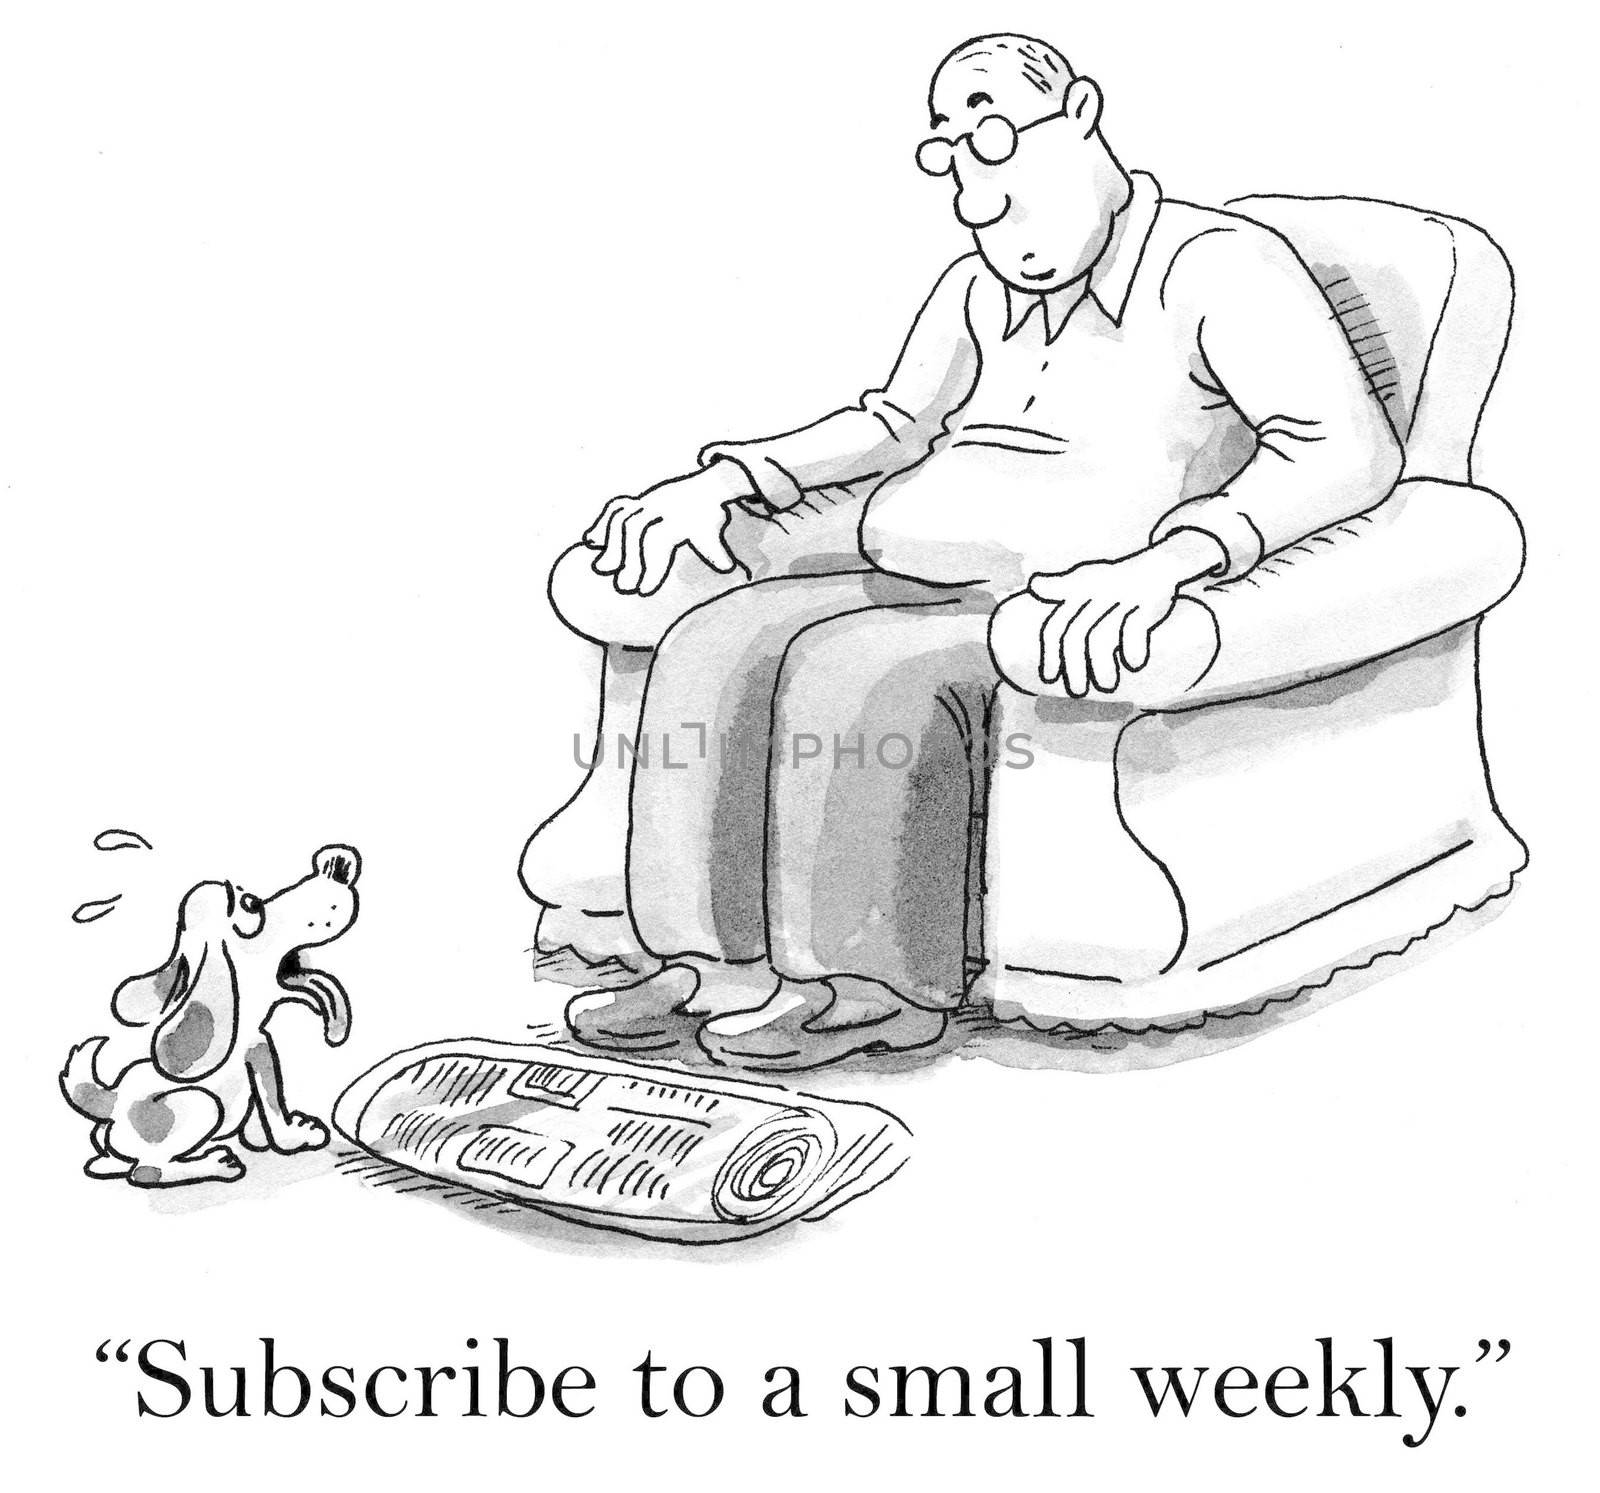 "Subscribe to a small weekly."